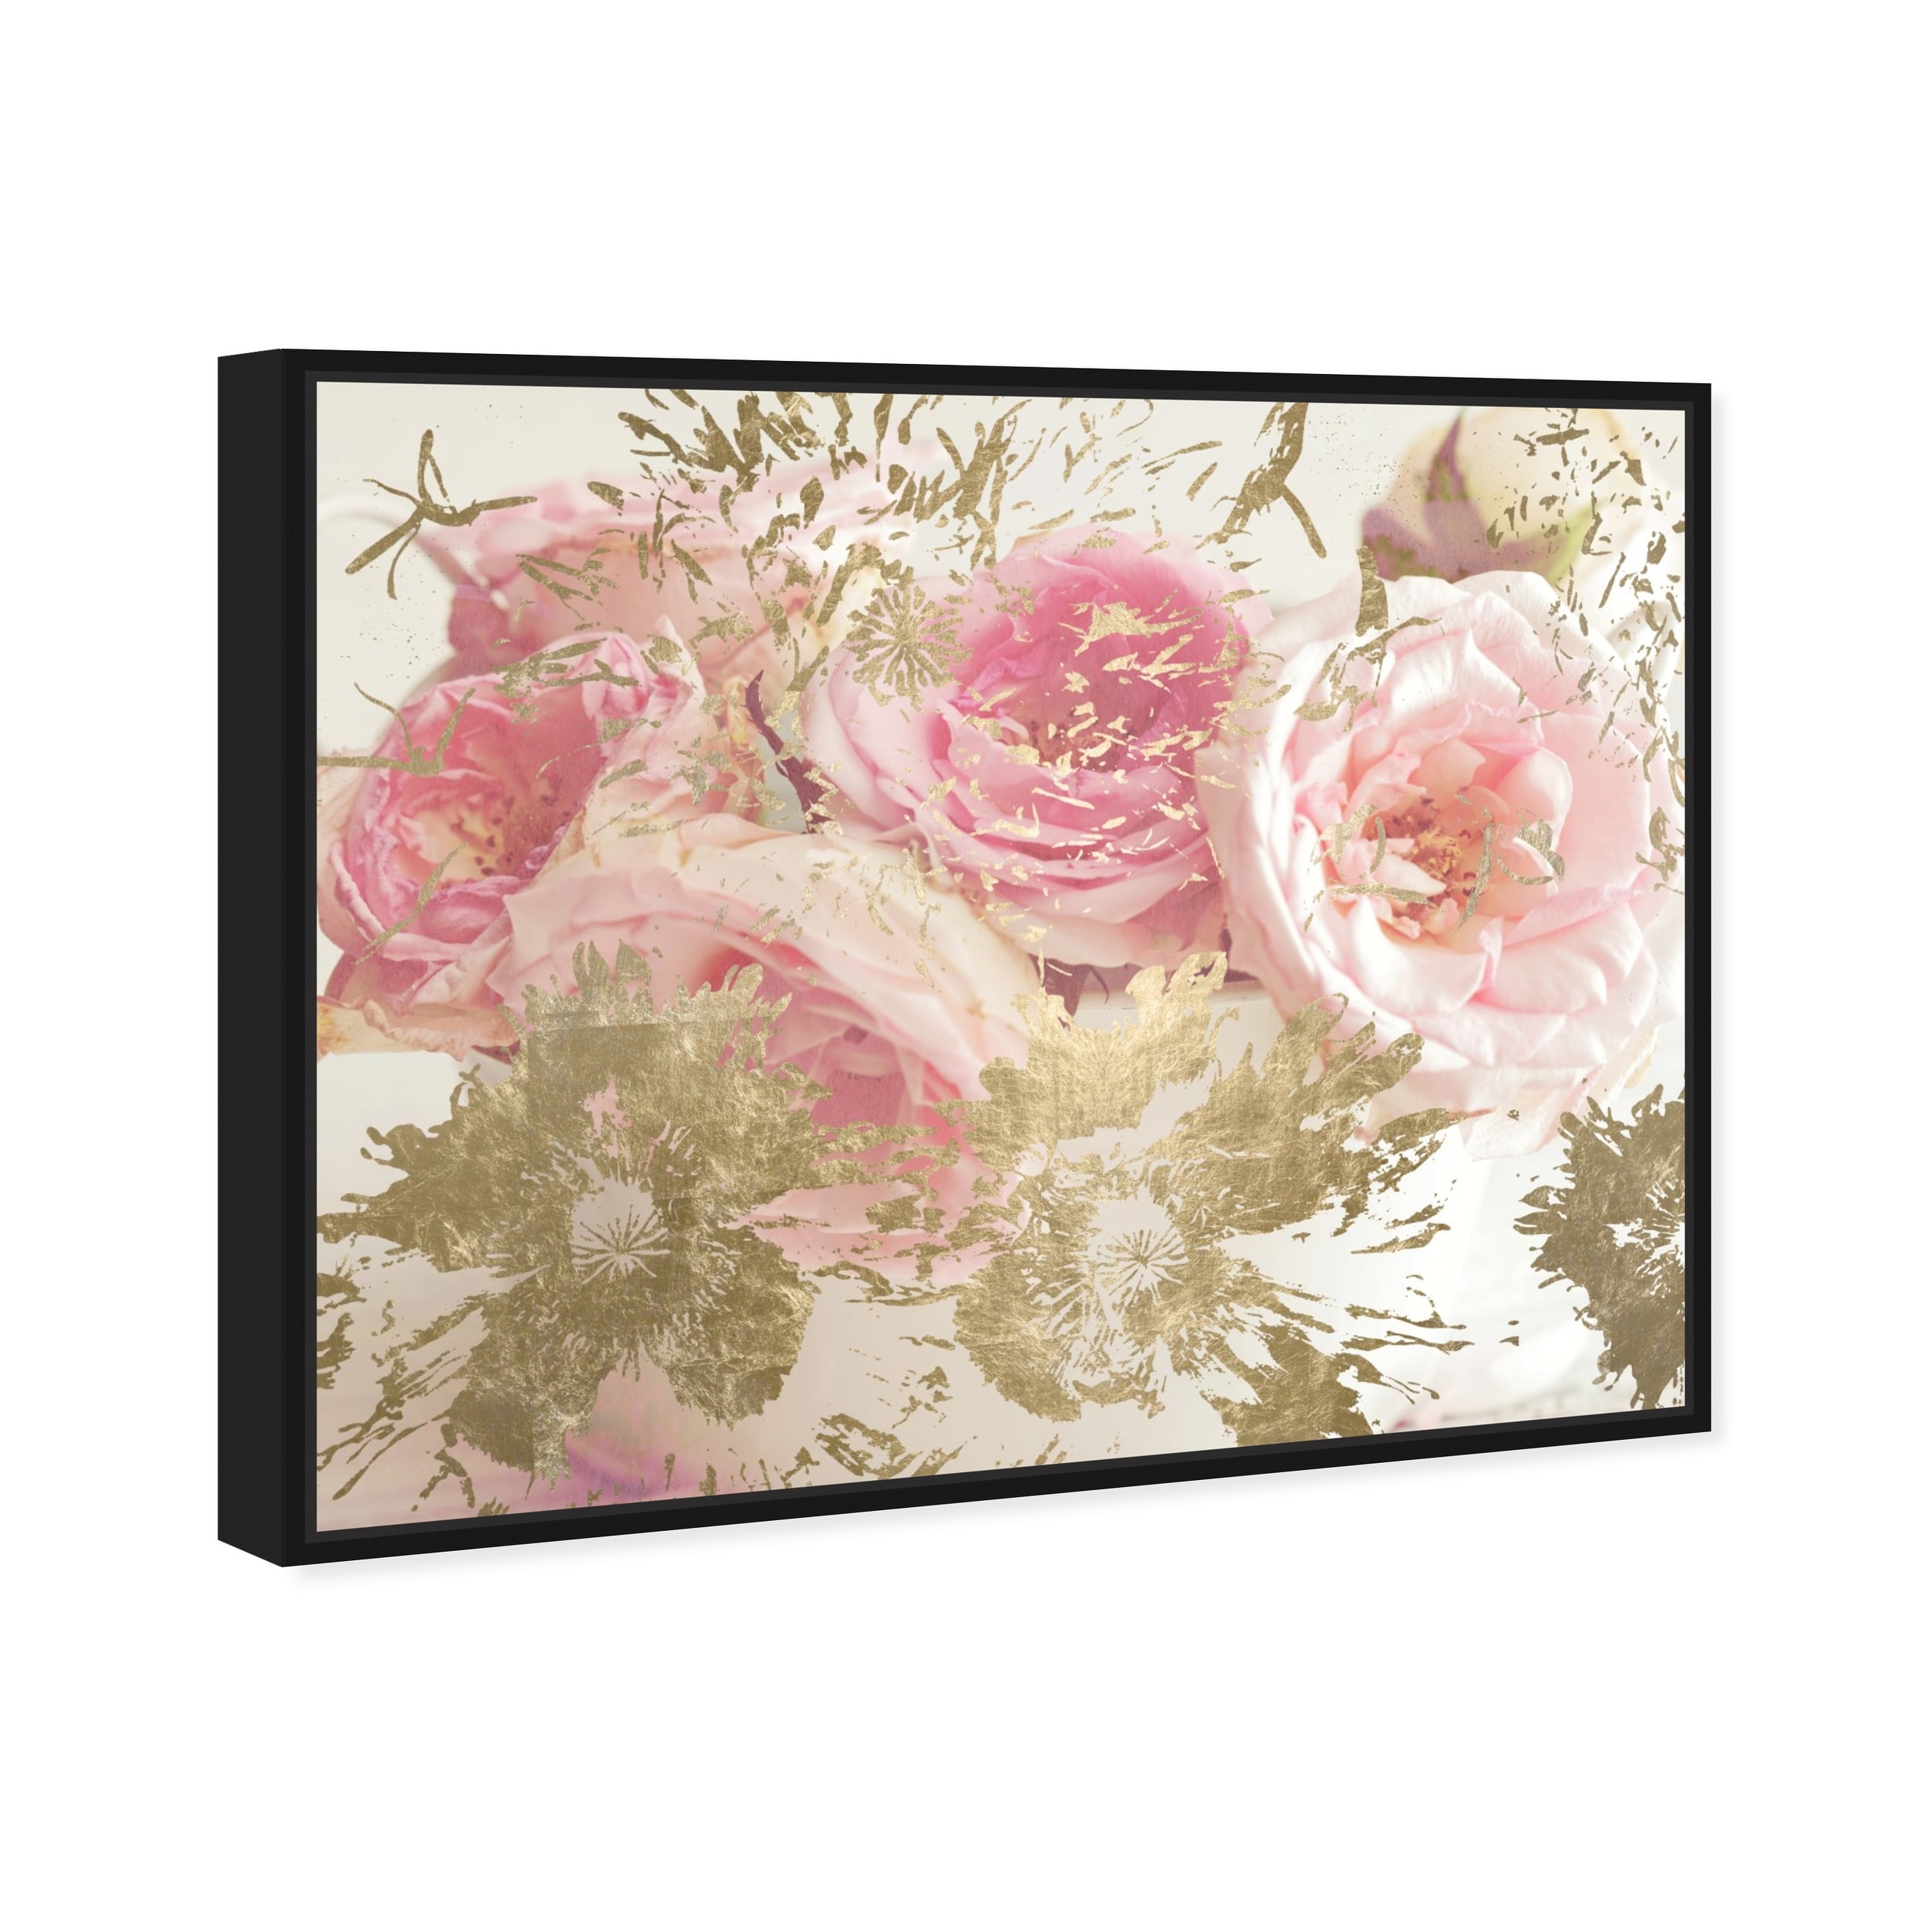 16252_36x24_CANV_XHD Oliver Gal Shabby Chic Romance The Floral and Botanical Wall Art Decor Collection Contemporary Premium Canvas Art Print The Oliver Gal Artist Co 